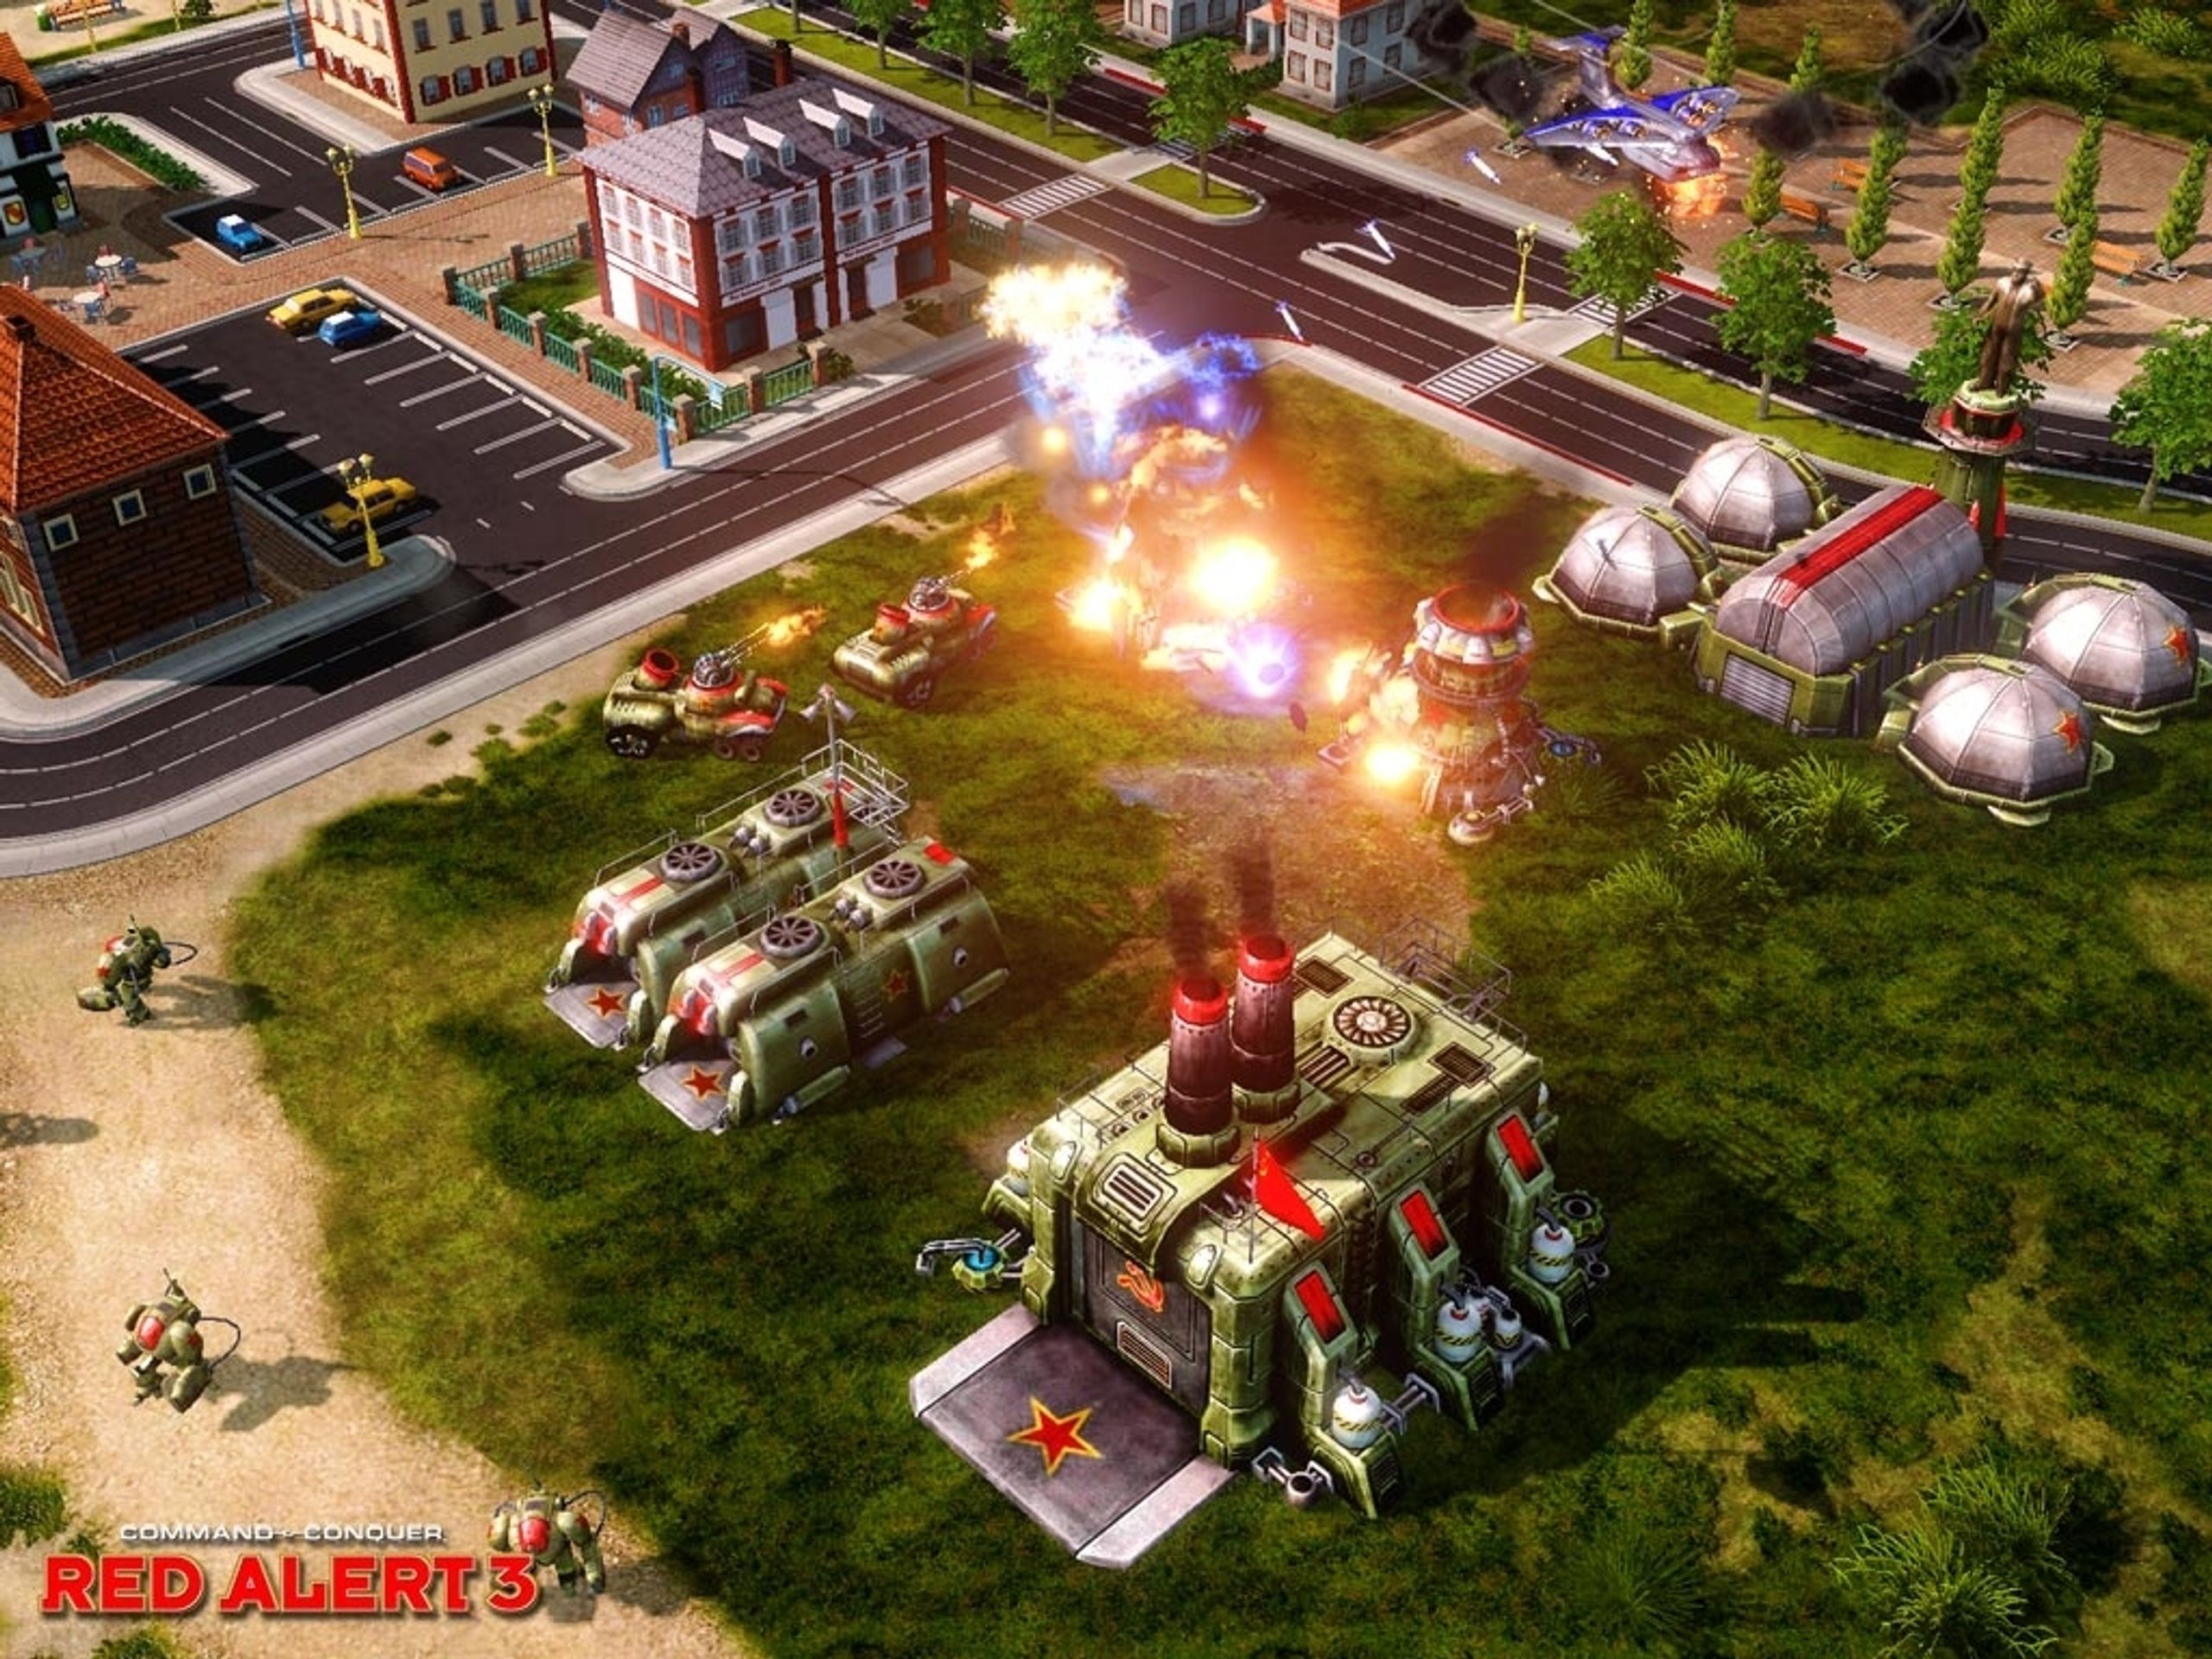 Command & Conquer: Red Alert 3 - Red Alert 3 galerie (7/16)